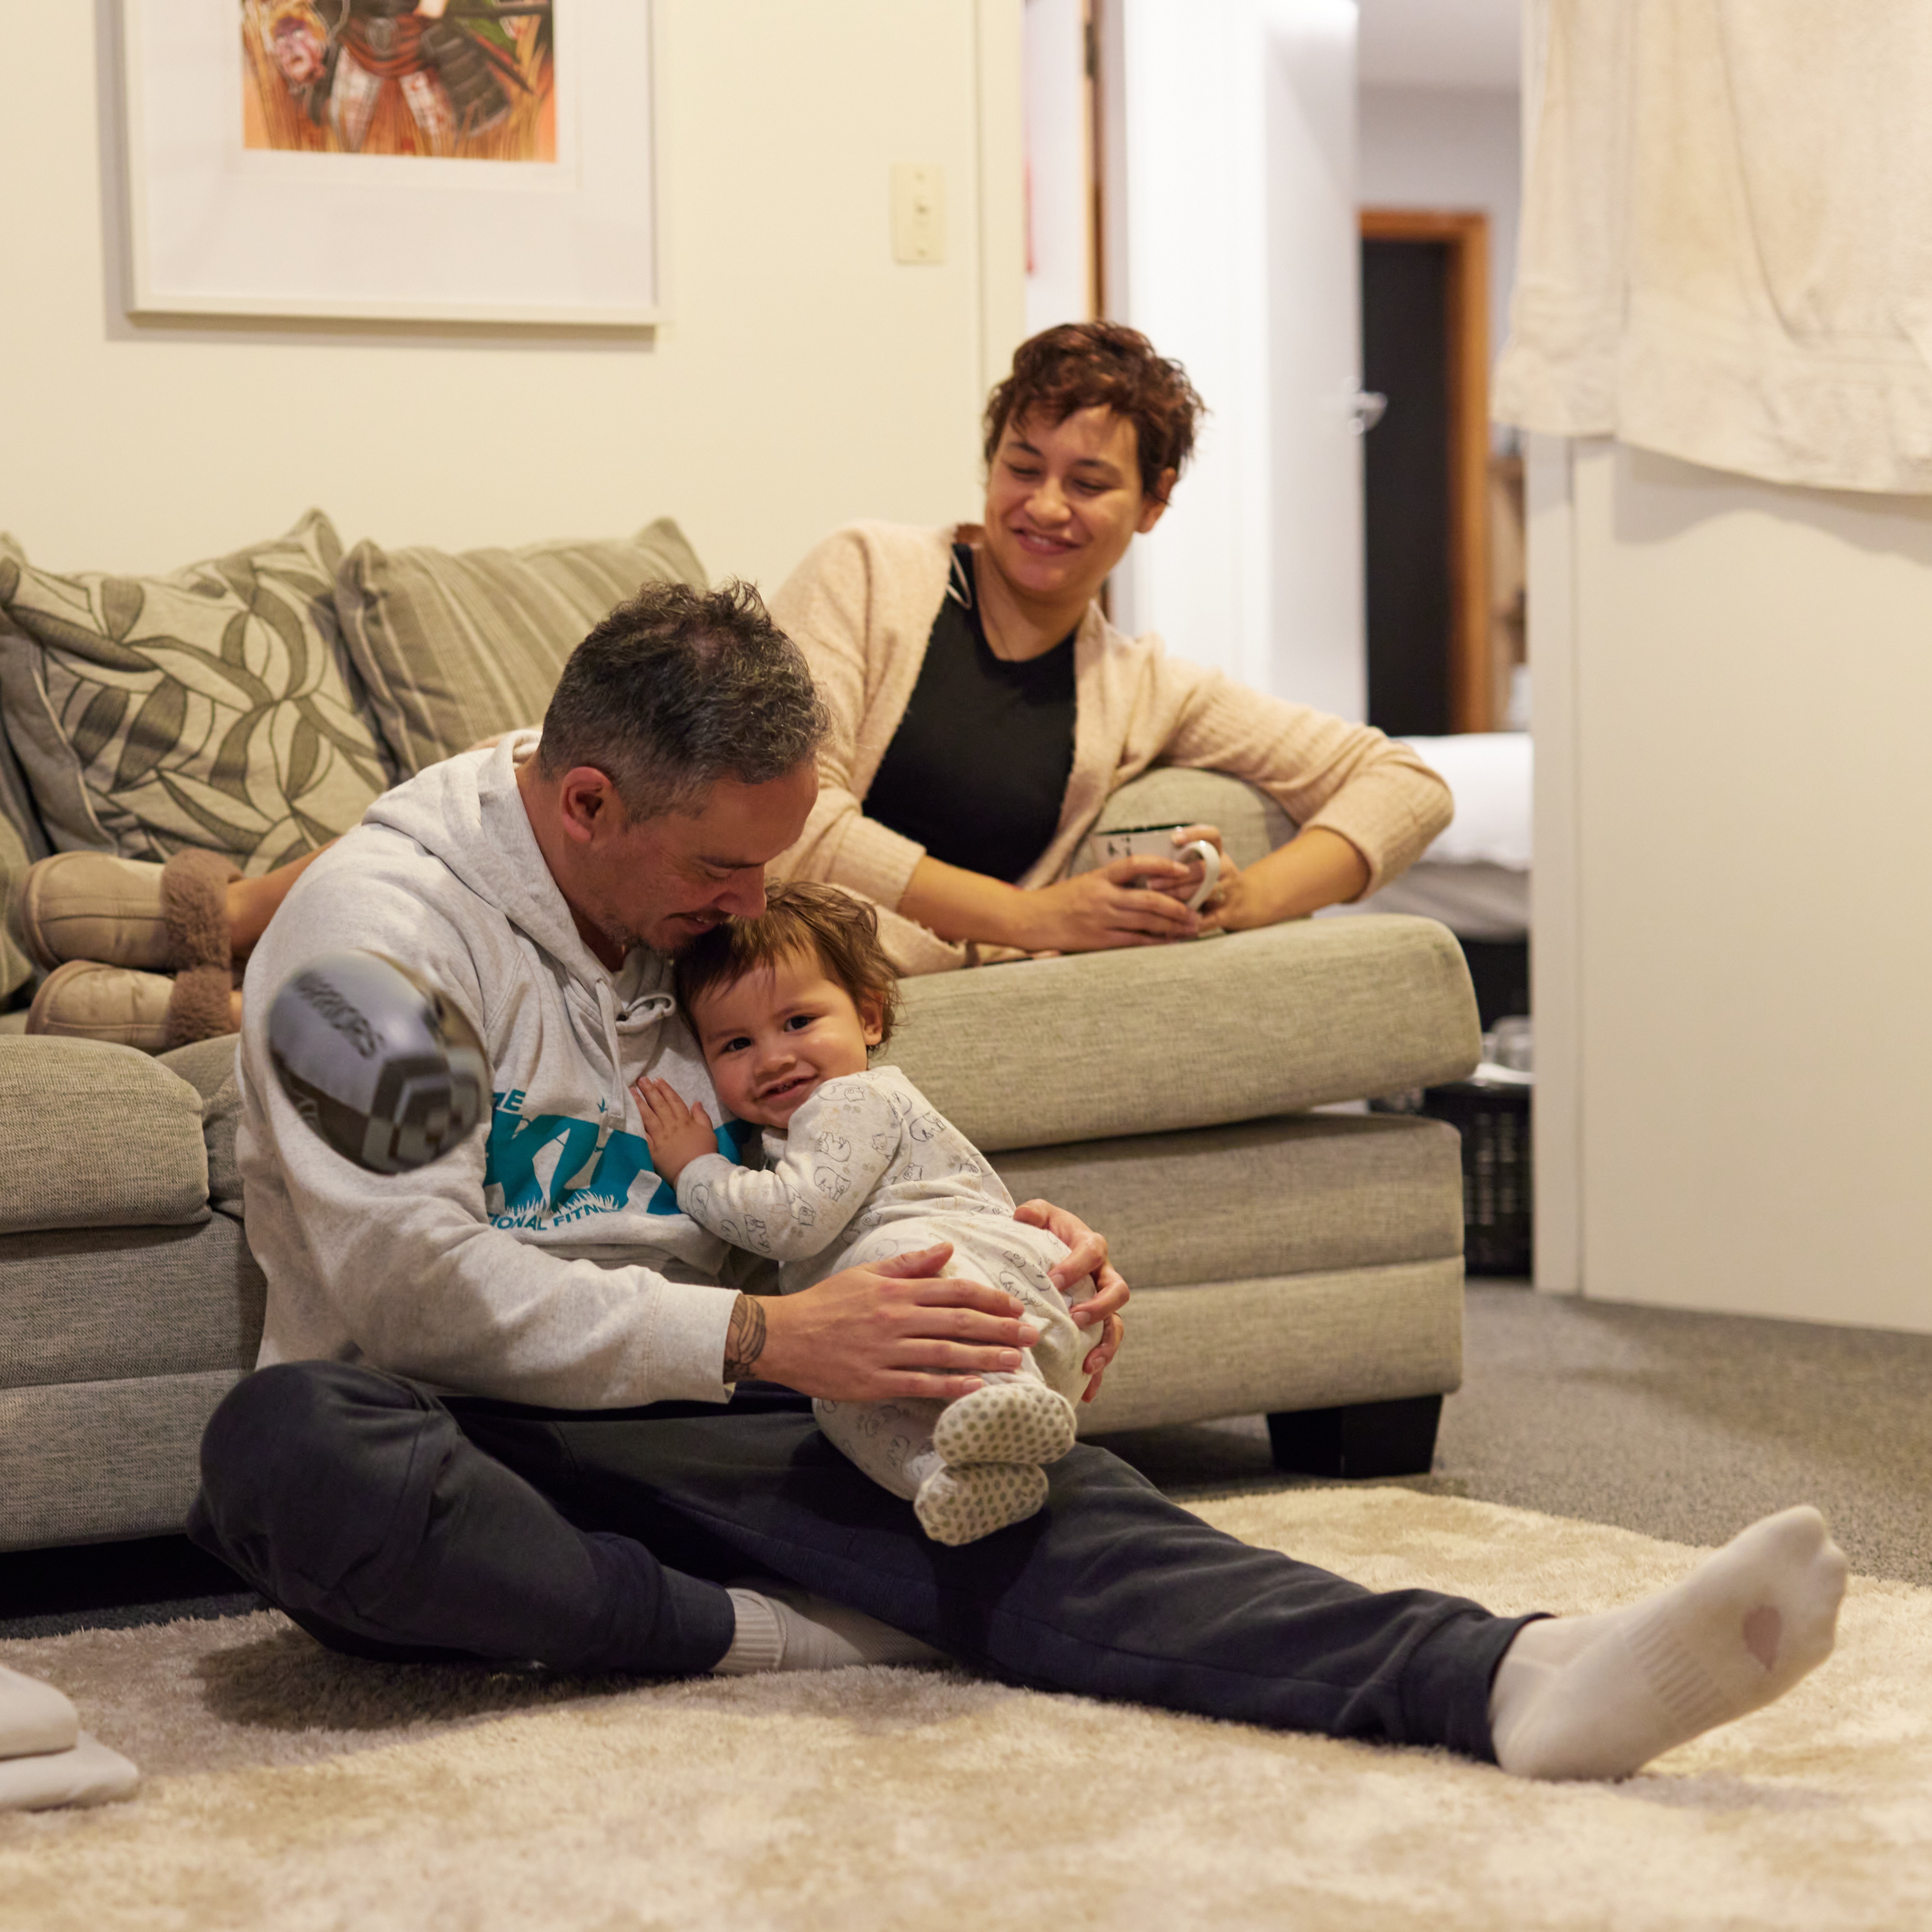 a man sitting on the floor holding a baby